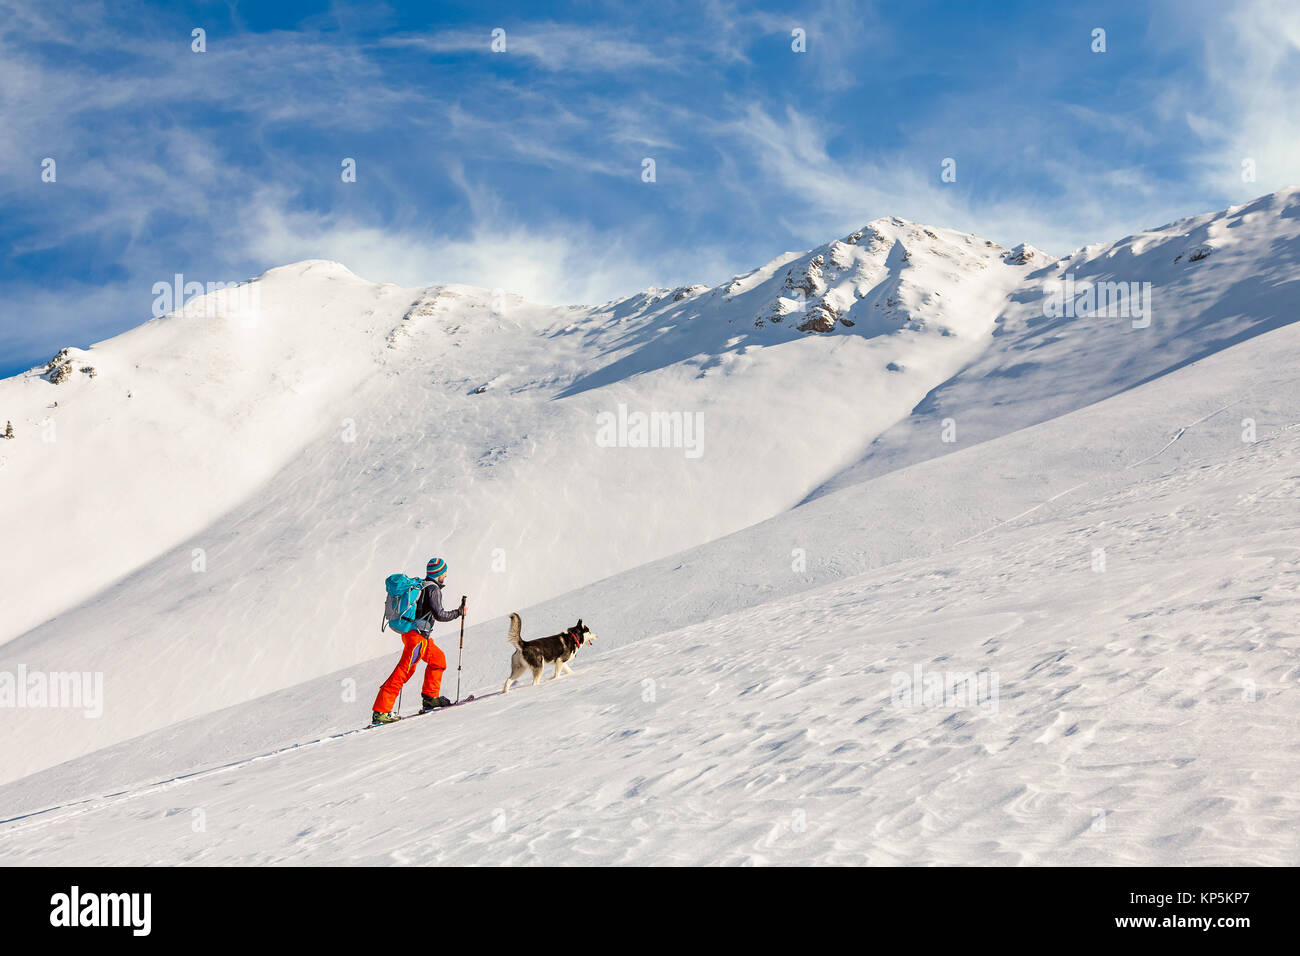 Young man backcountry skiing, going uphill on the mountain, with Stock Photo